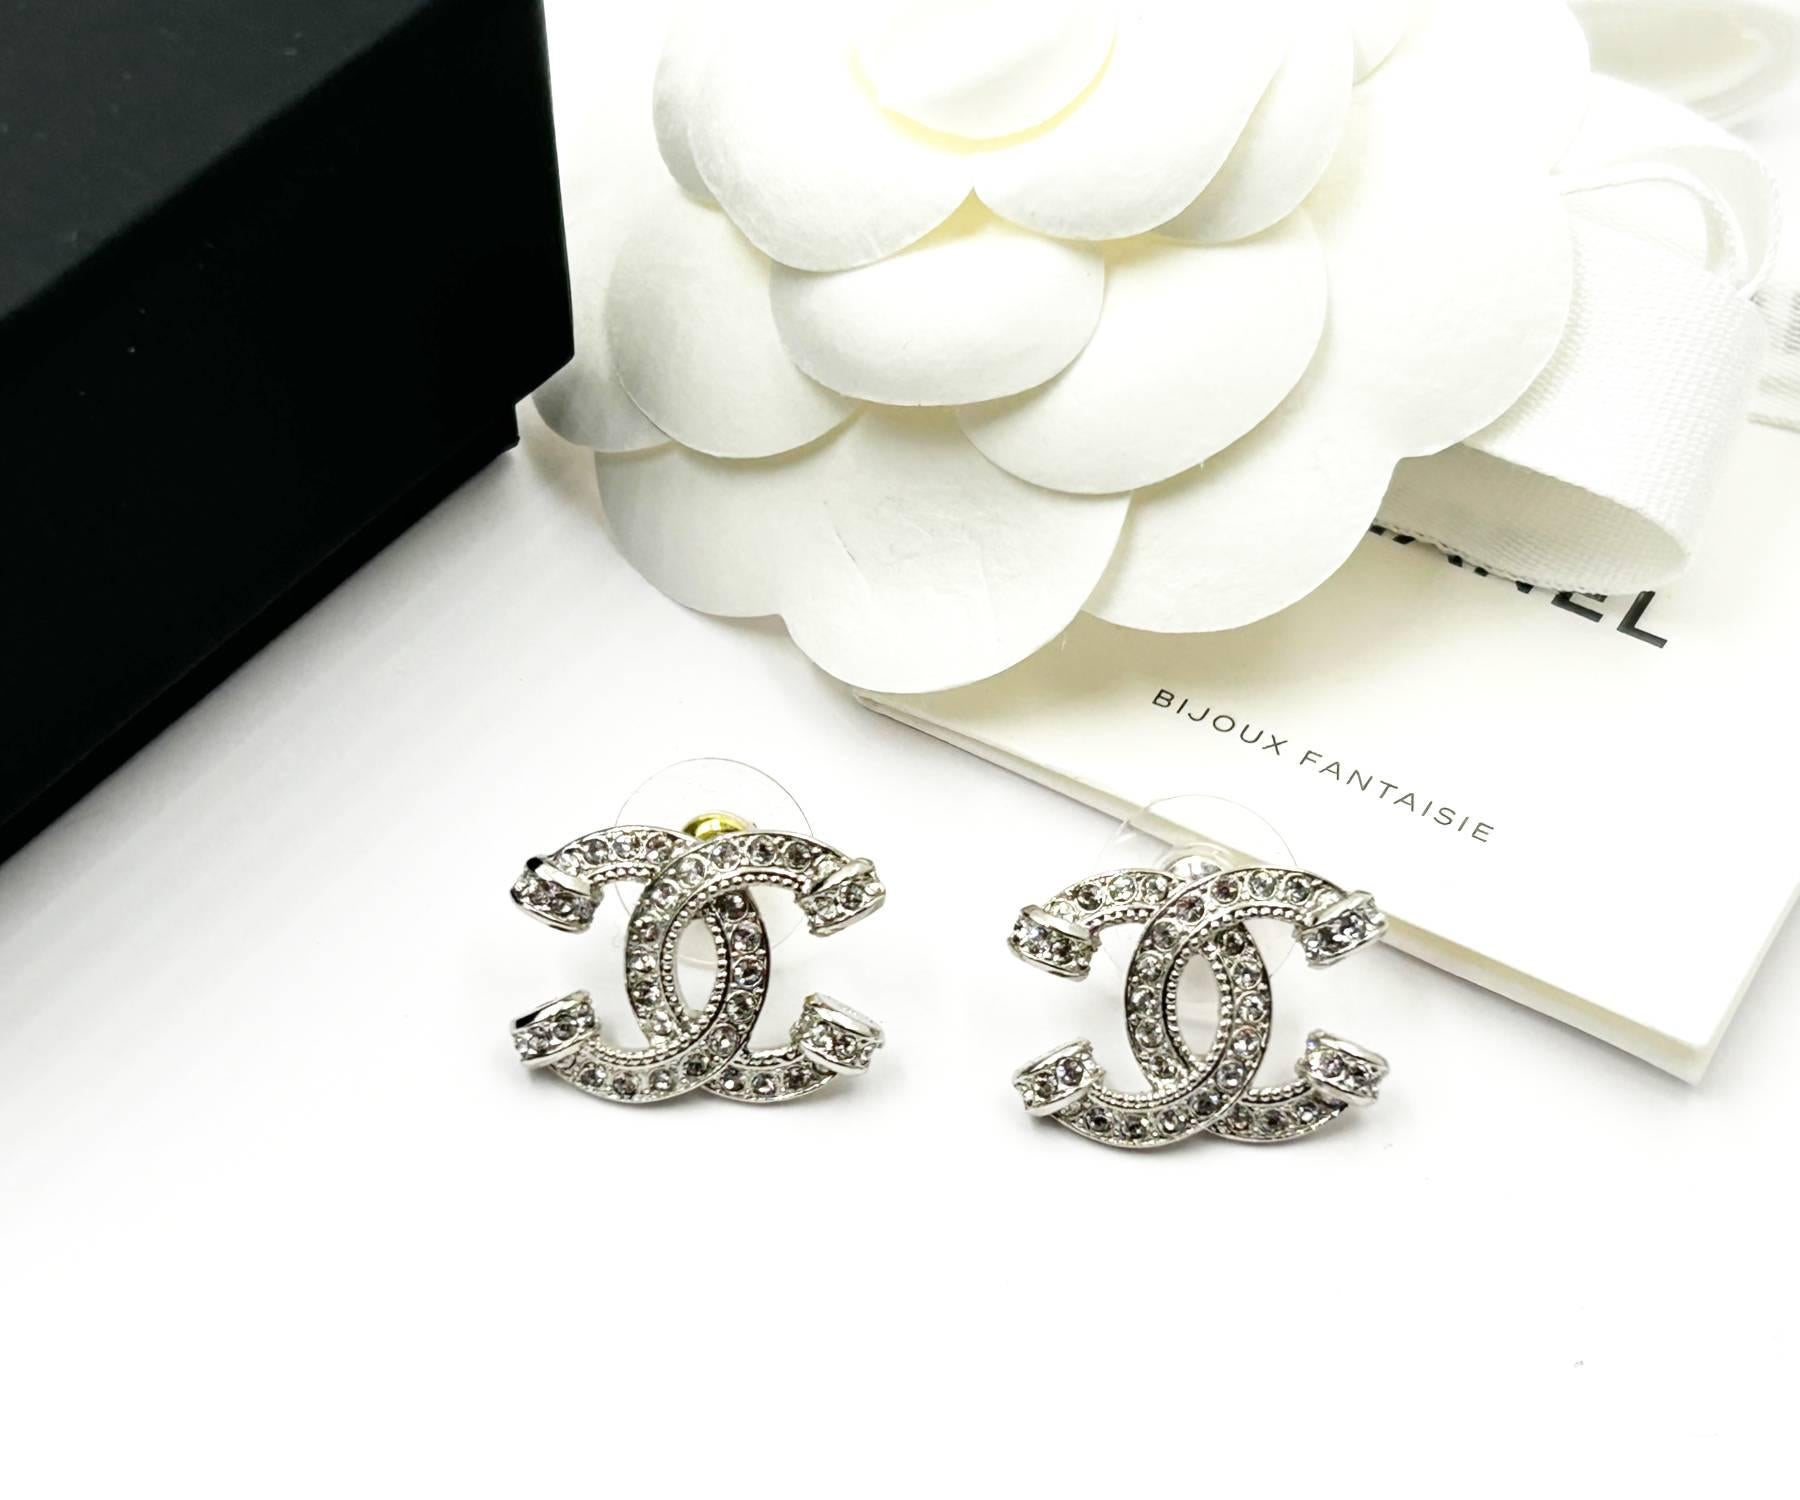 Chanel Brand New Silver CC Pillar Crystal Piercing  Earrings

*Marked 23
*Made in France
*Comes with the original box, pouch, booklet, ribbon and camellia flower
*Brand New

-It is approximately 0.9